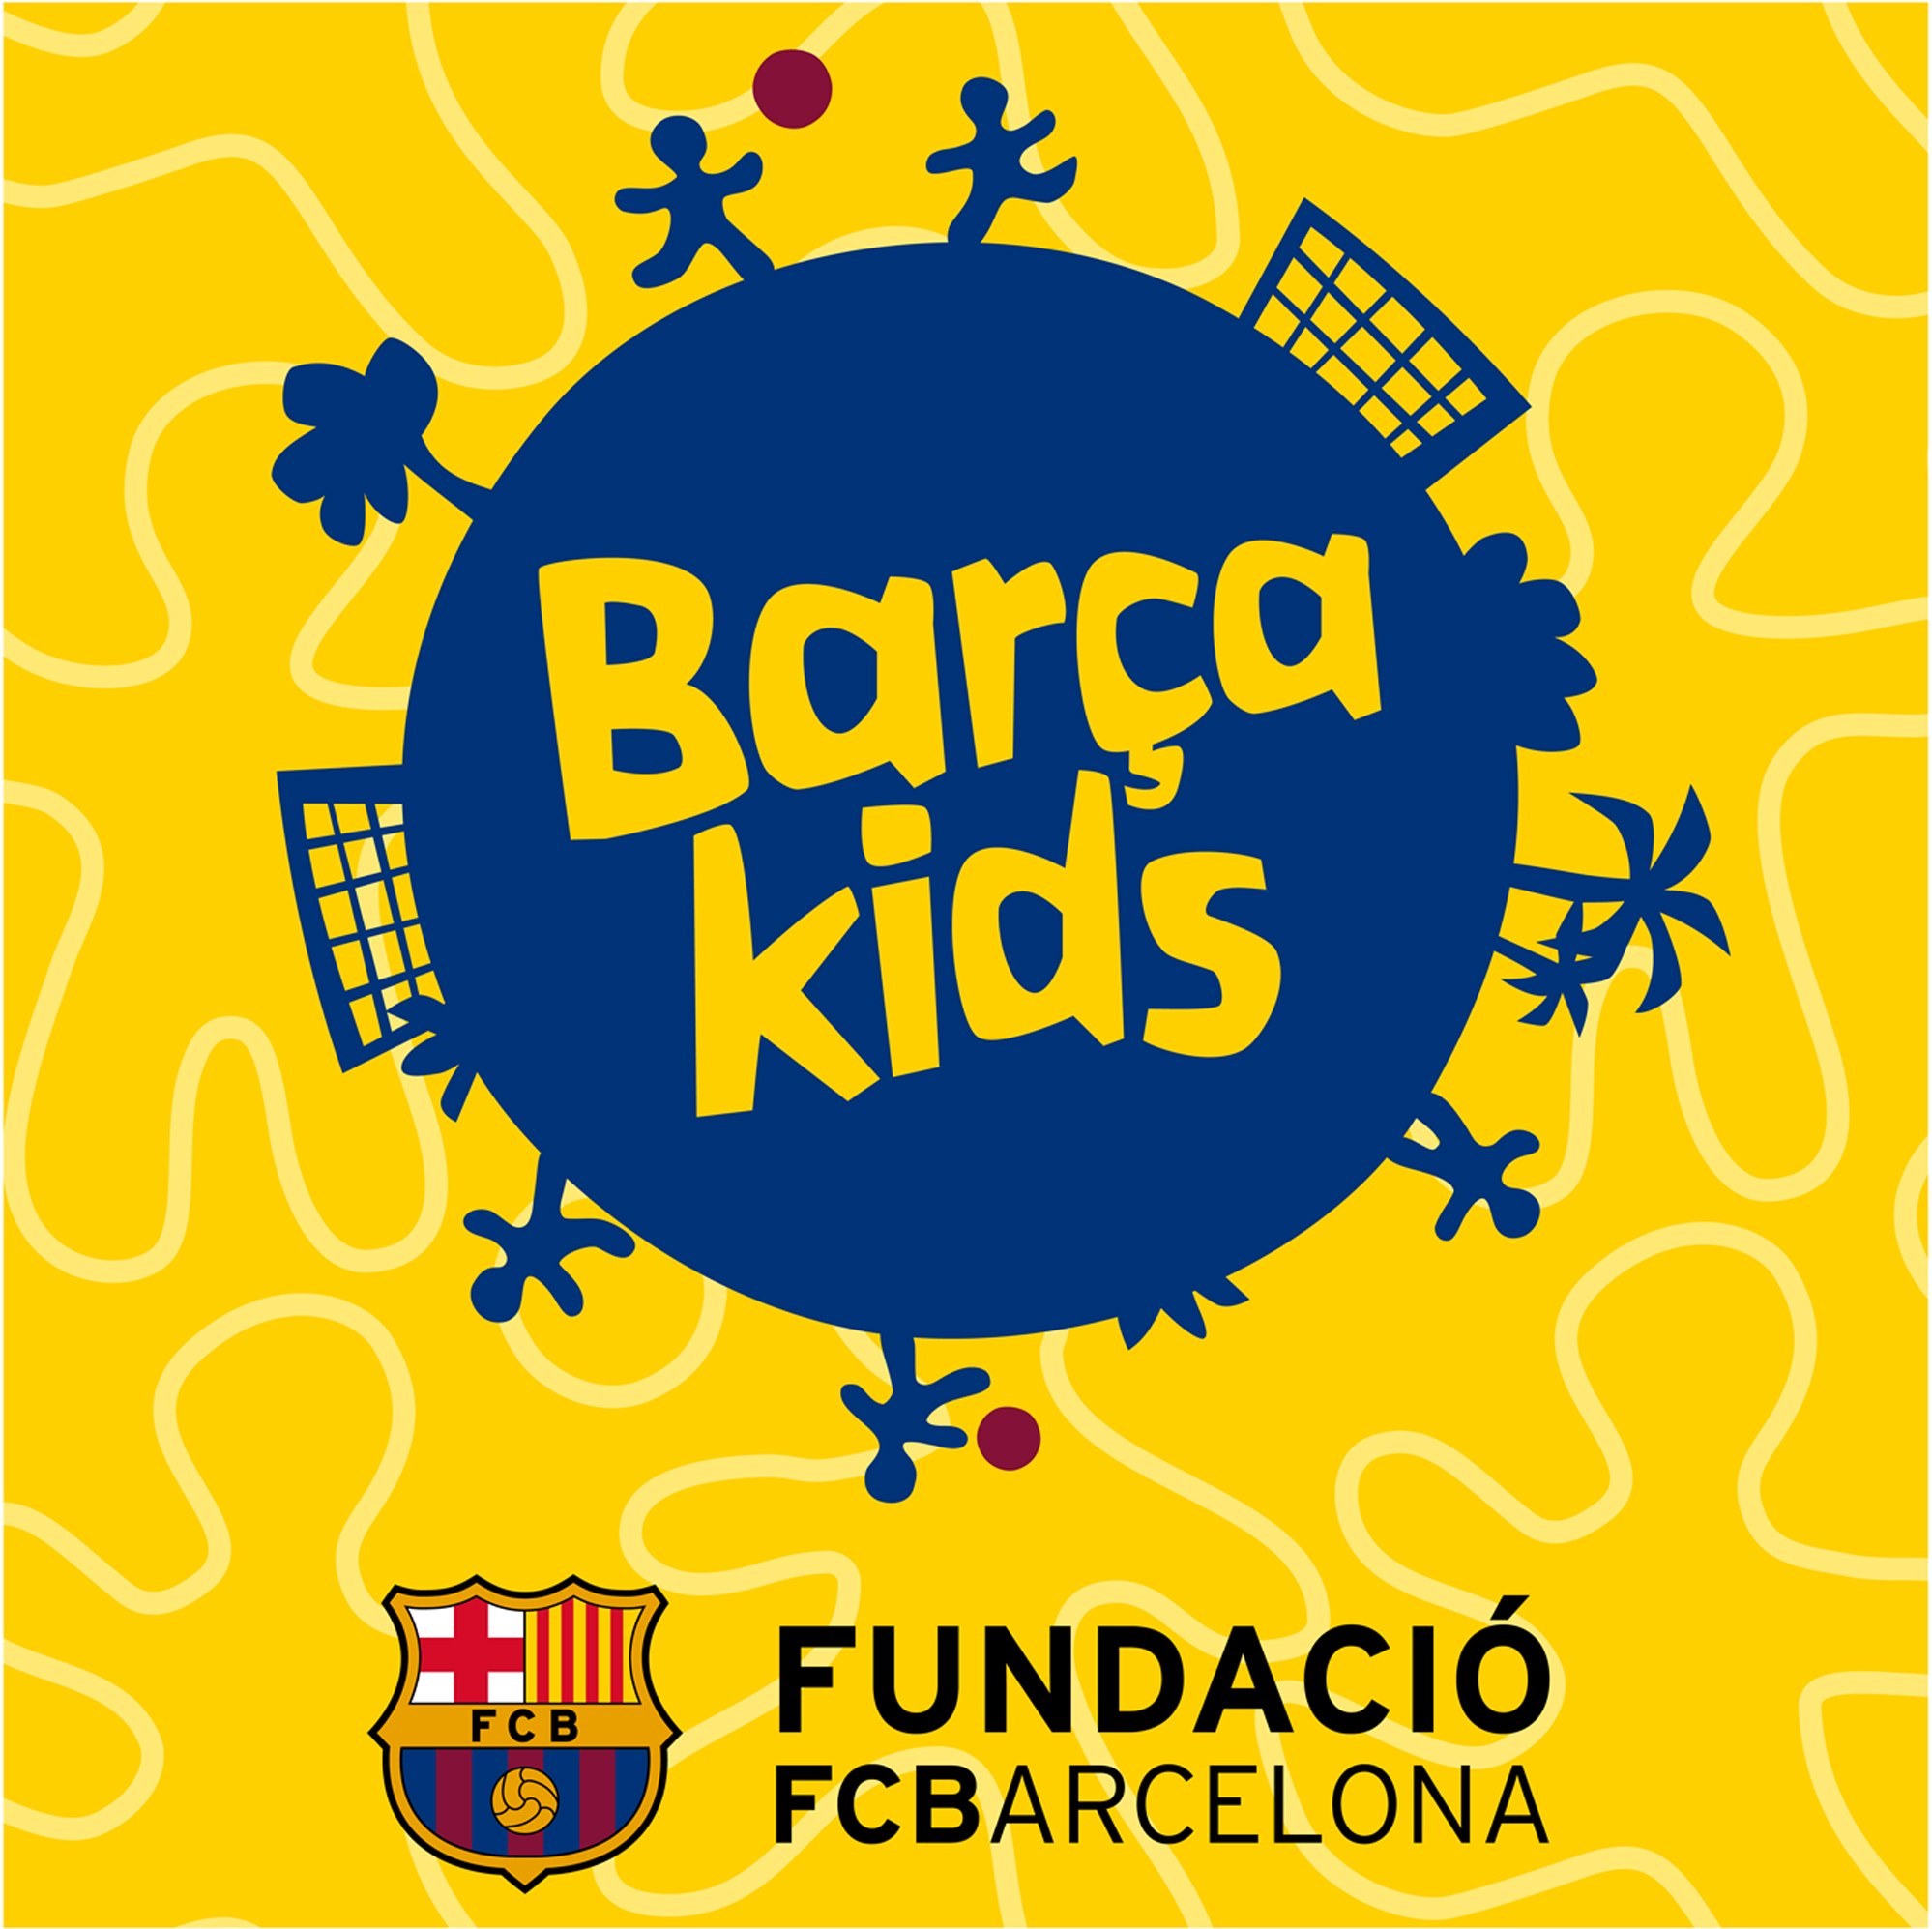 Barcakids